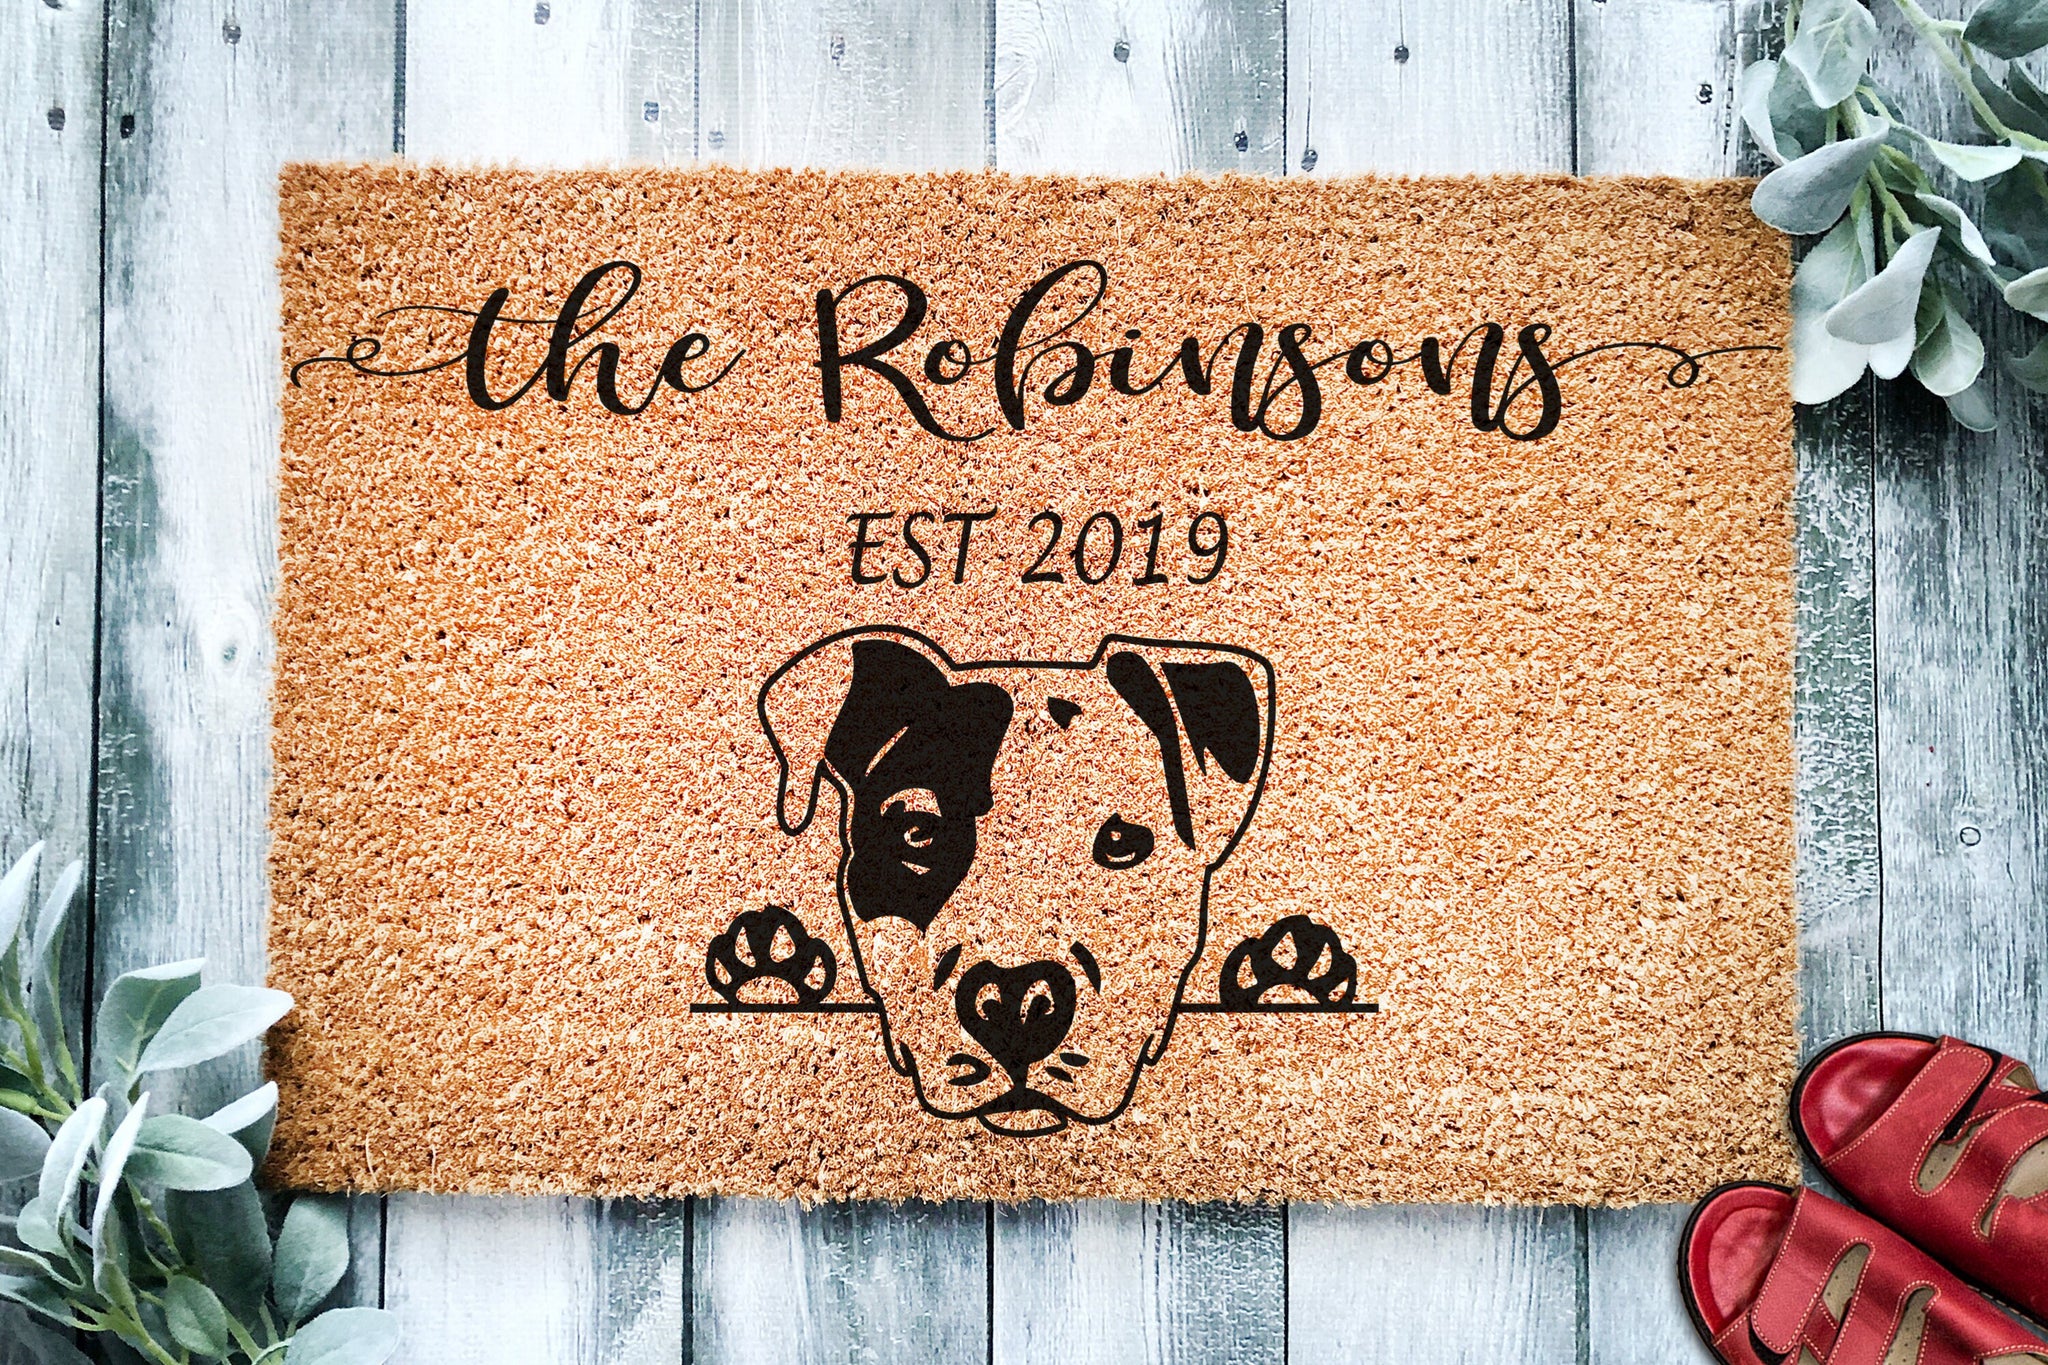 GIBZ Personalized Doormat with Dogs Pattern Custom Pet Photo Welcome Mat  for Home Indoor Outdoor Entrance Rug, 23.6 × 15.7